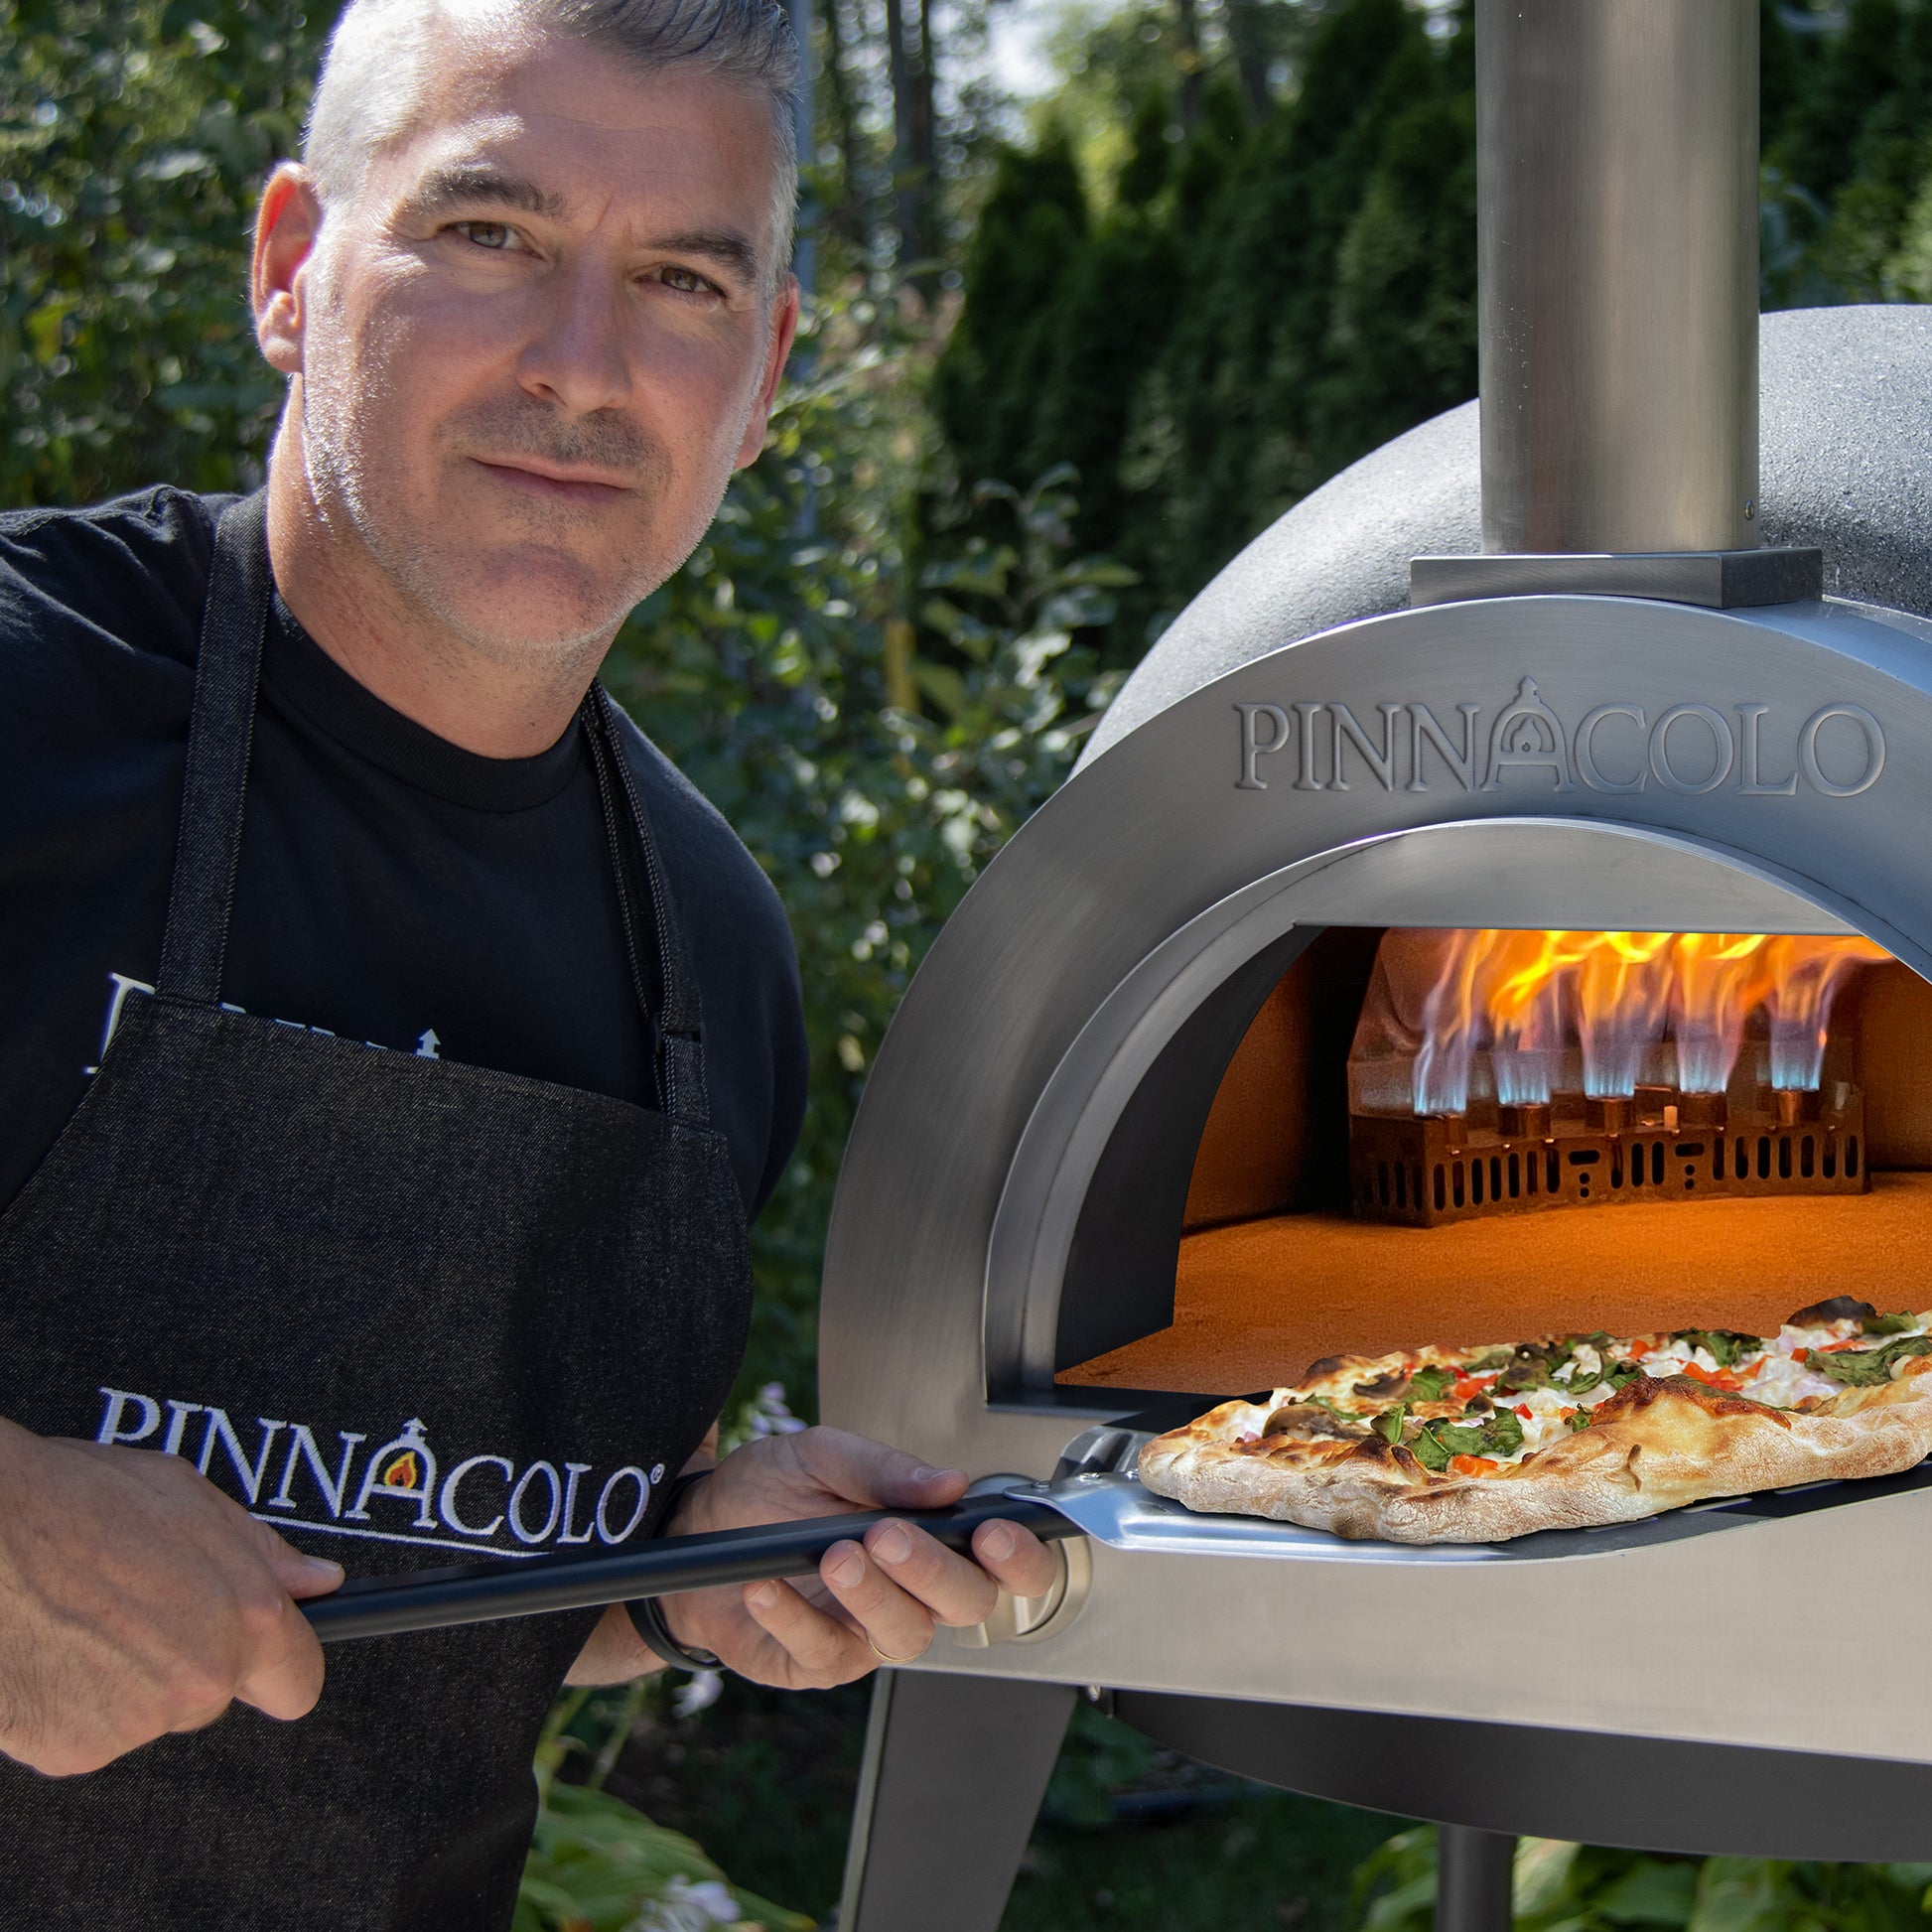 PINNACOLO | IBRIDO (HYBRID) Gas/Wood Pizza Oven With Accessories - PPO103 with guy putting a pizza in the oven